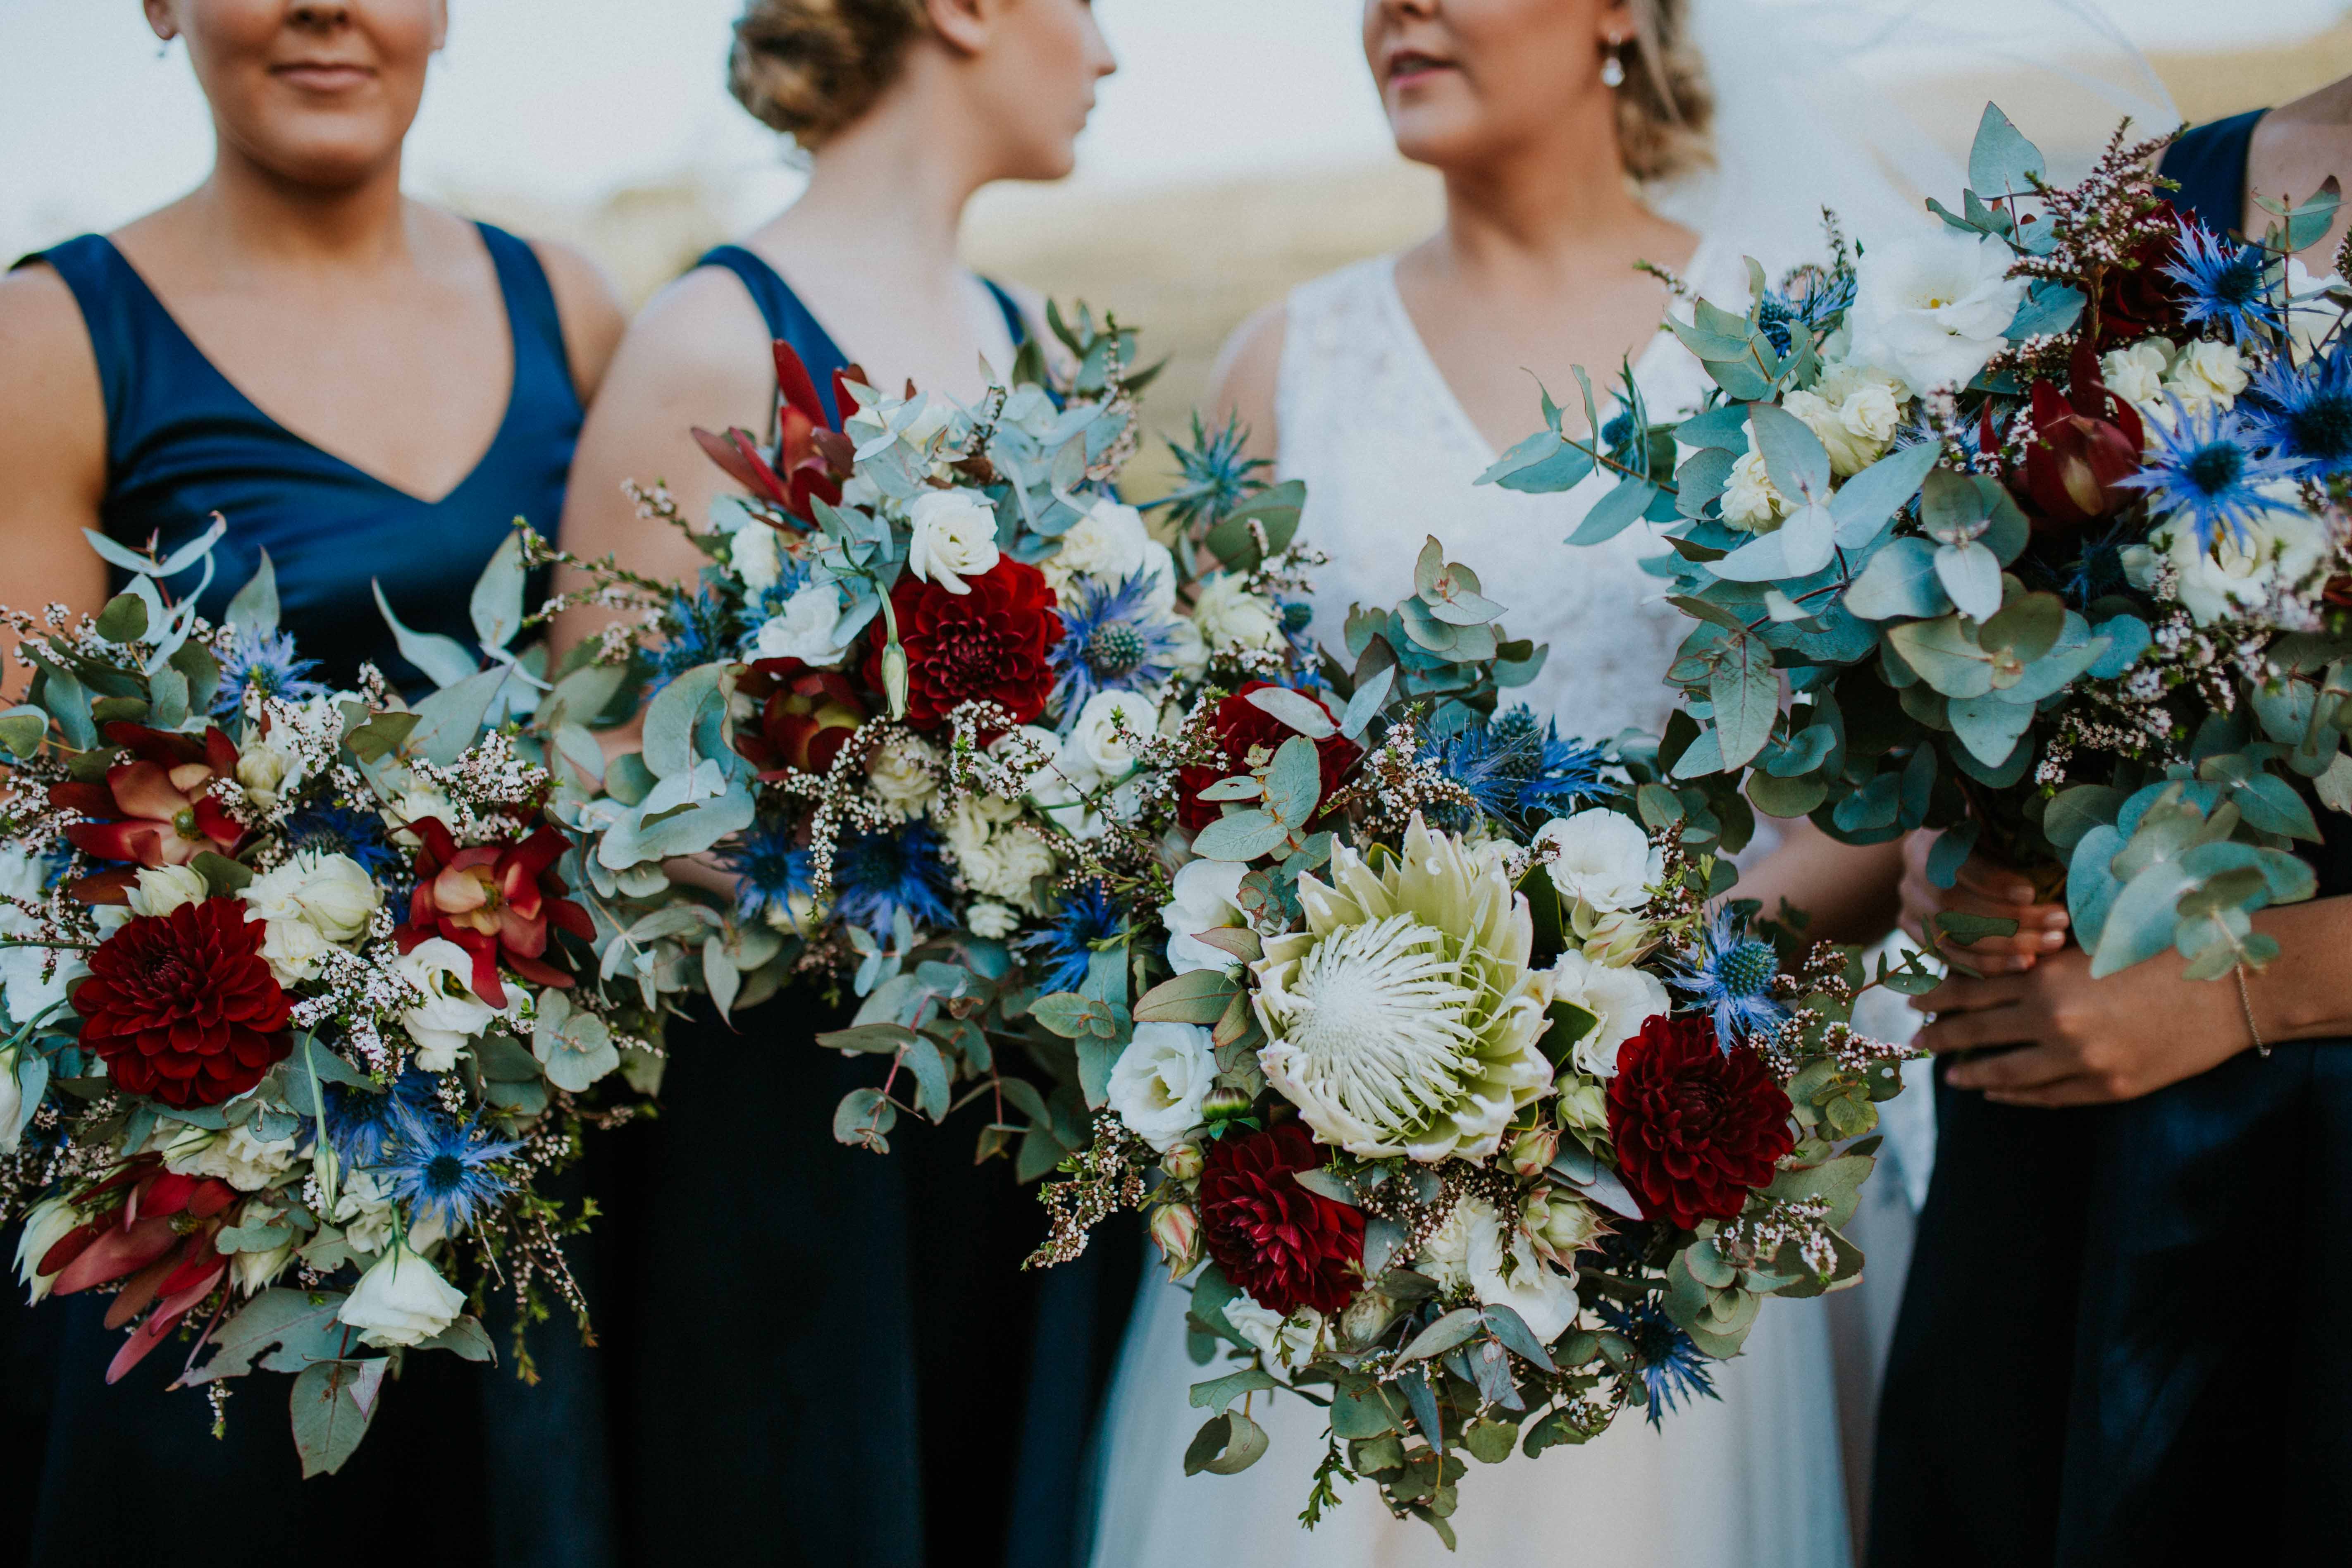 Native Bouquets with Protea, Dahlias, Sea holly and gum